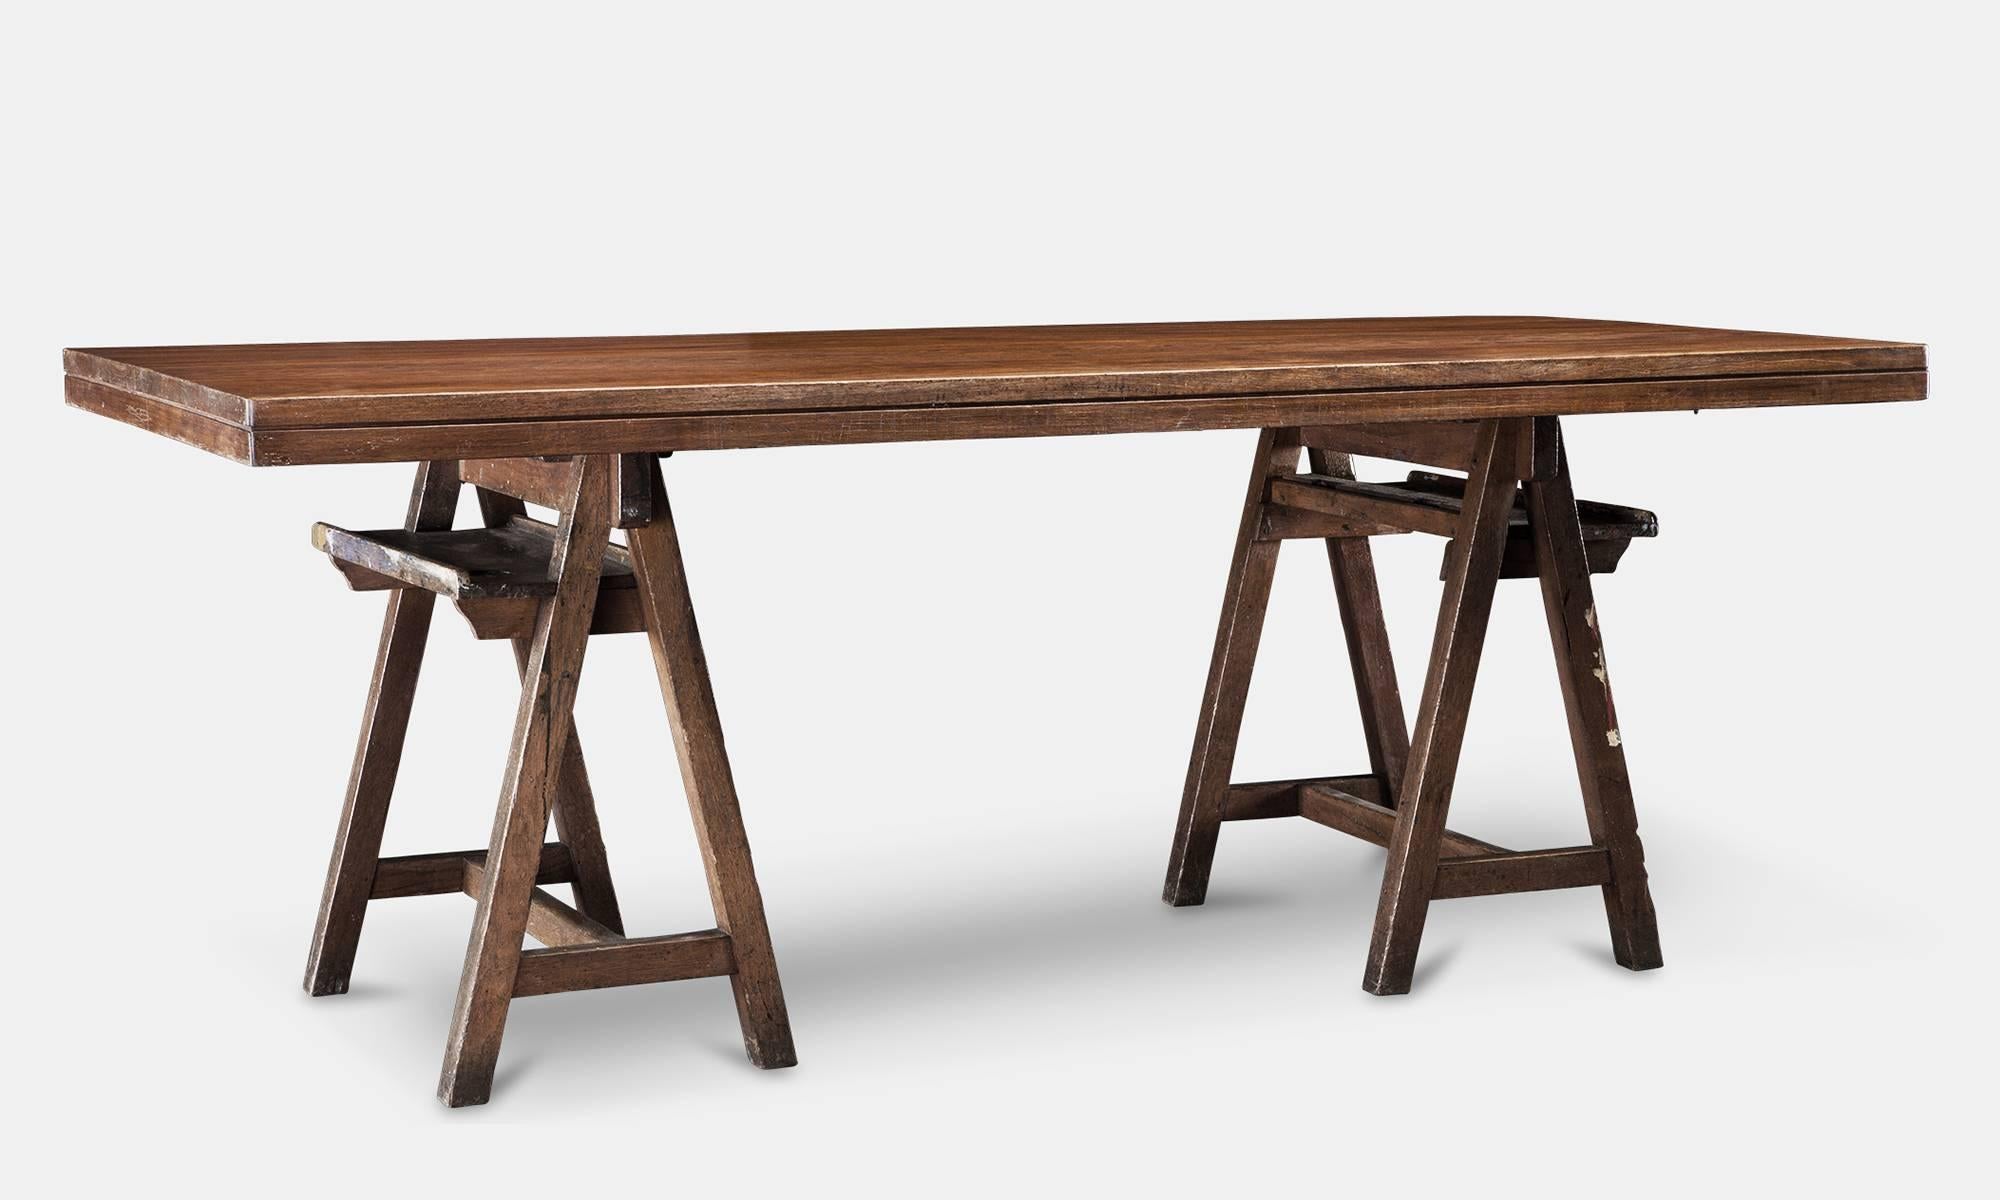 Table created from a pair of oak artists trestles with a mahogany laboratory table top.